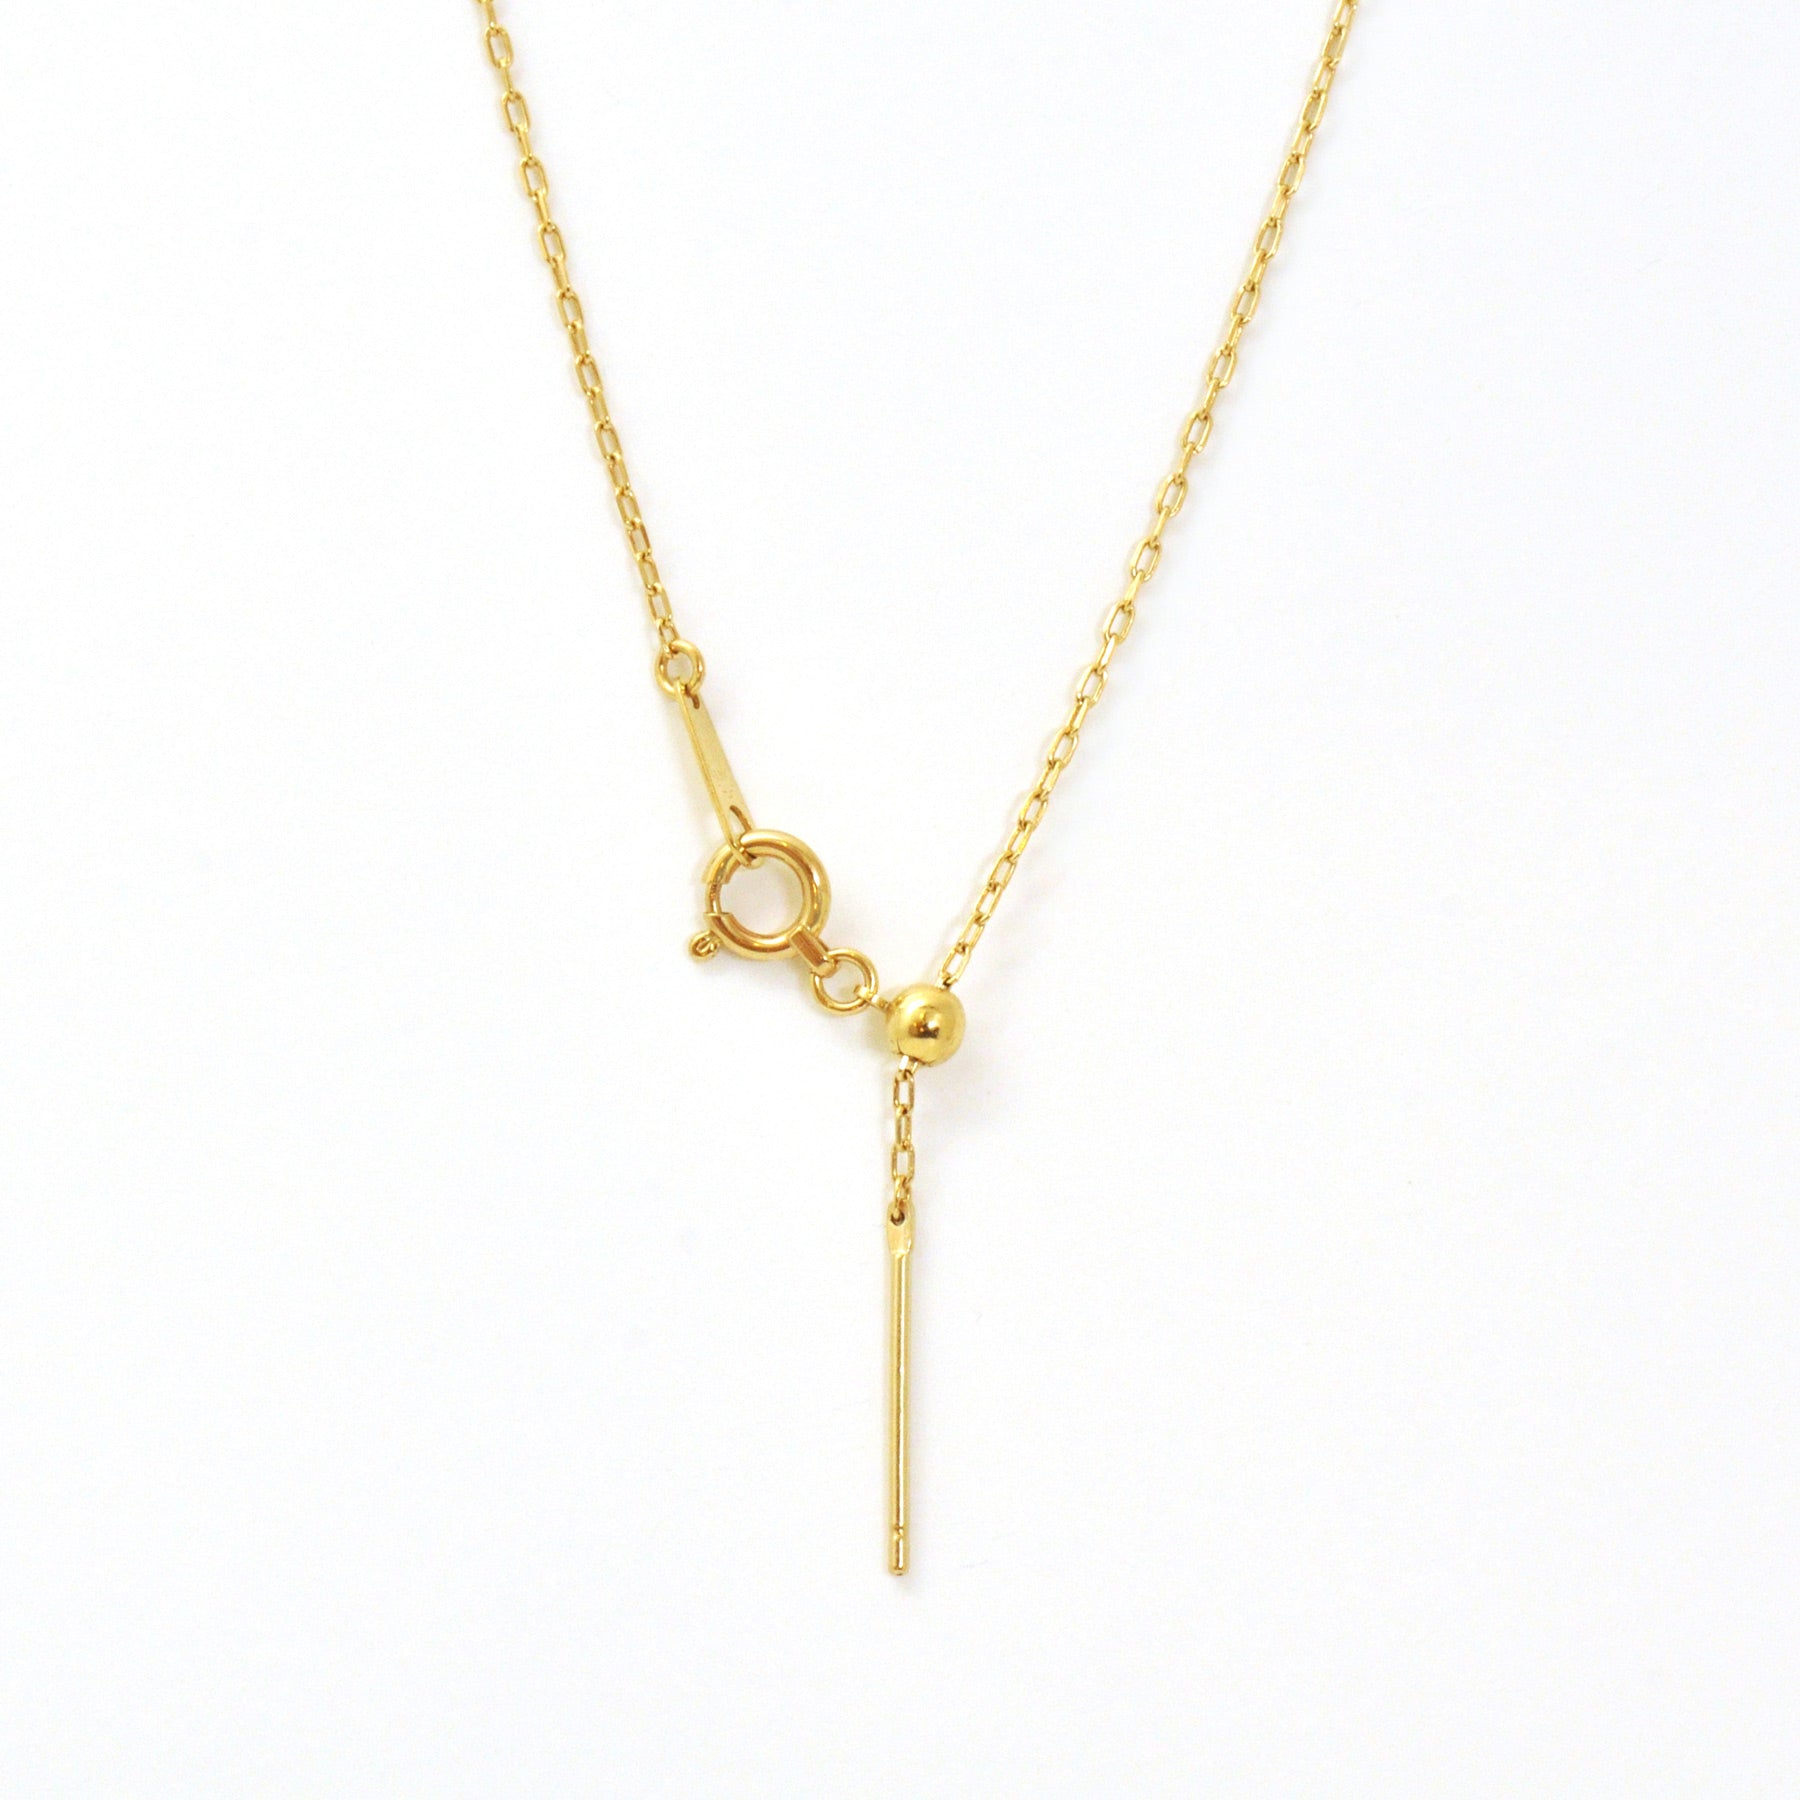 [Palette] 10K Yellow Gold Slide Pin Chain Necklace - Product Image